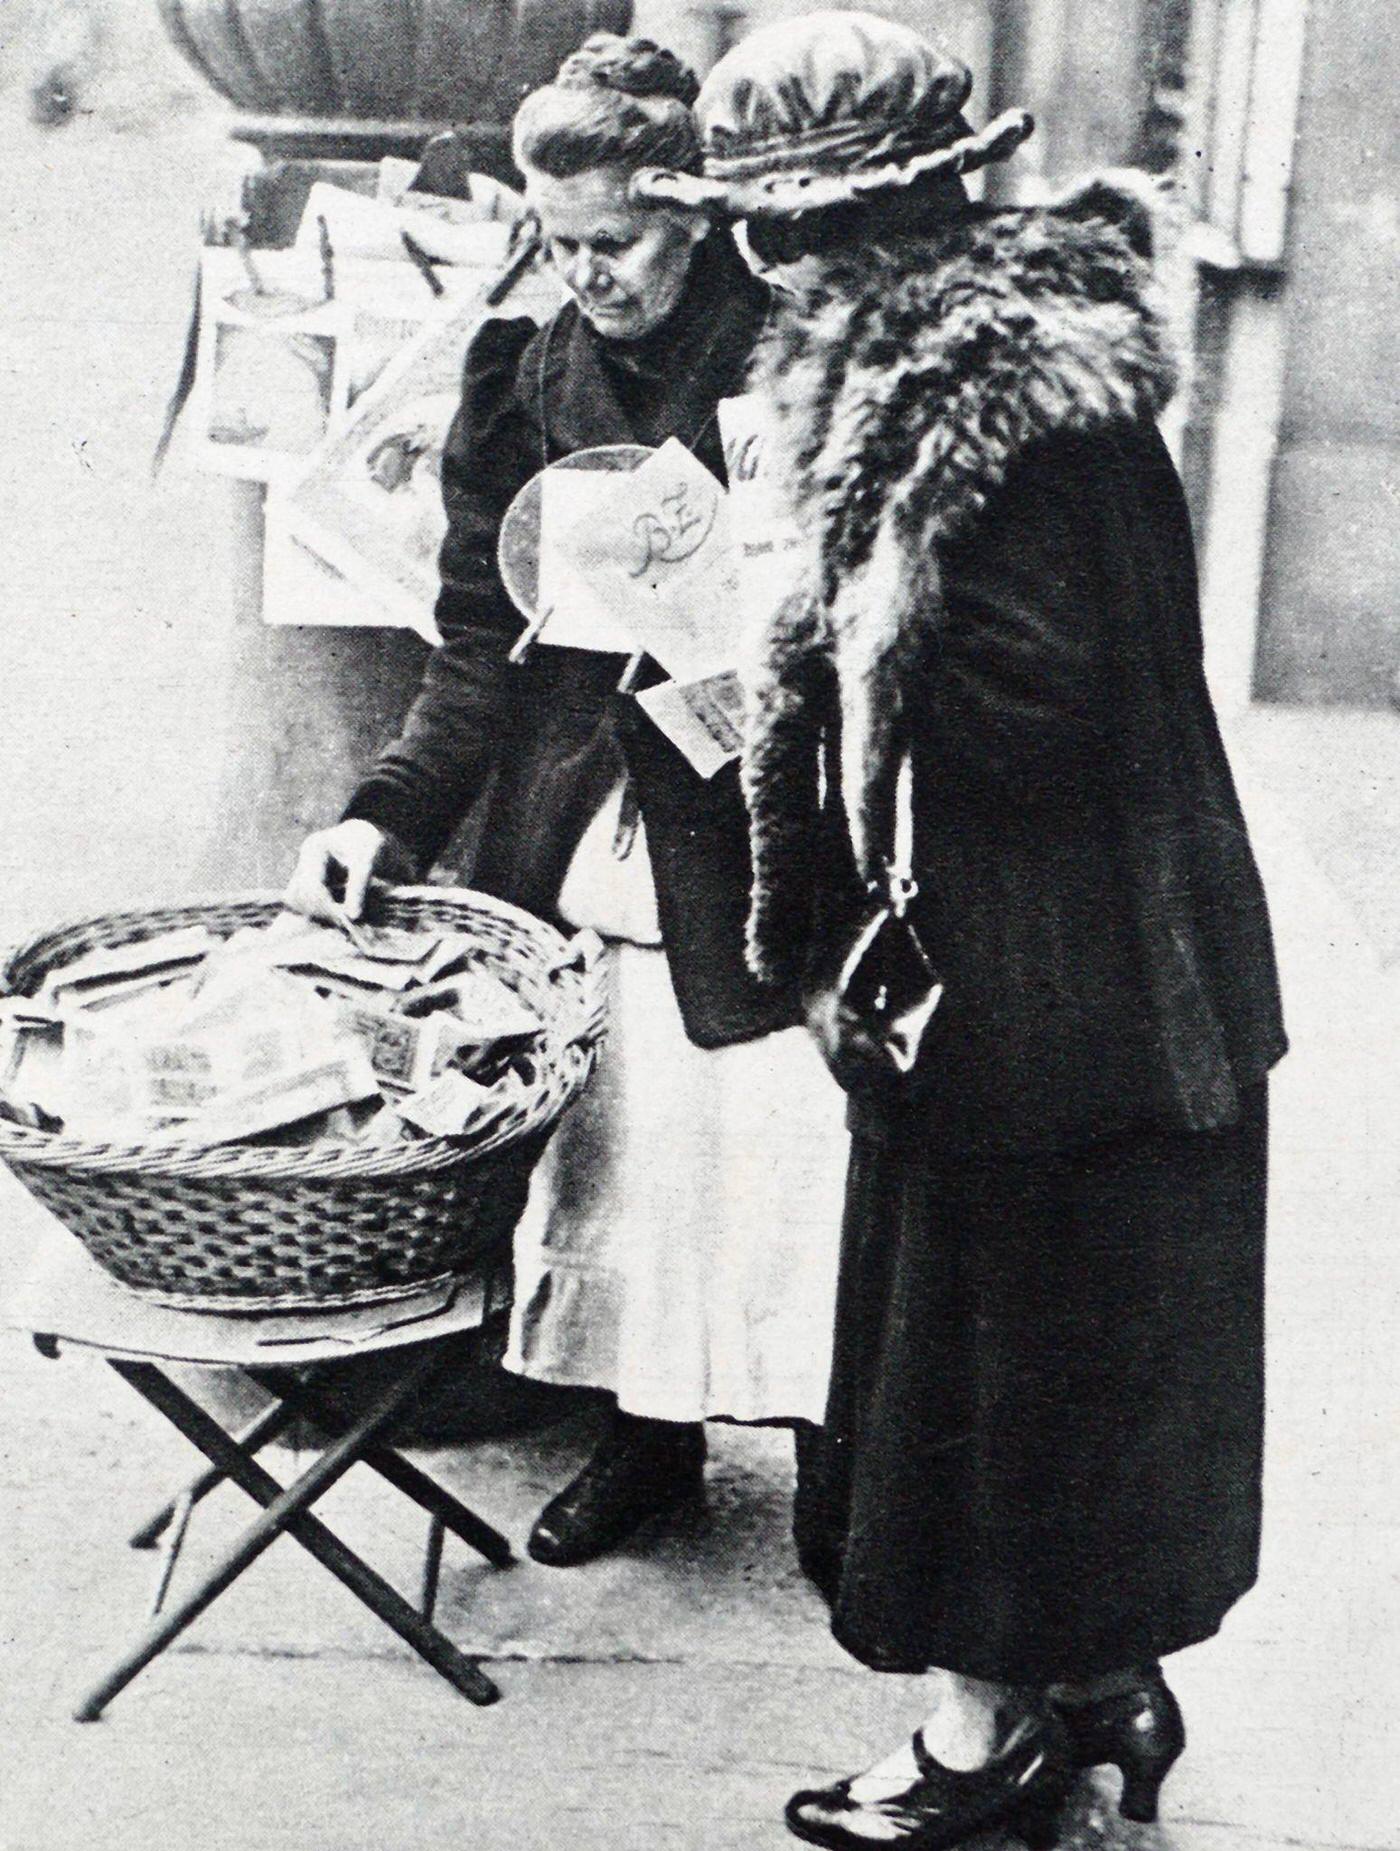 Basket full of banknotes during Weimar Germany's hyperinflation, 1923.